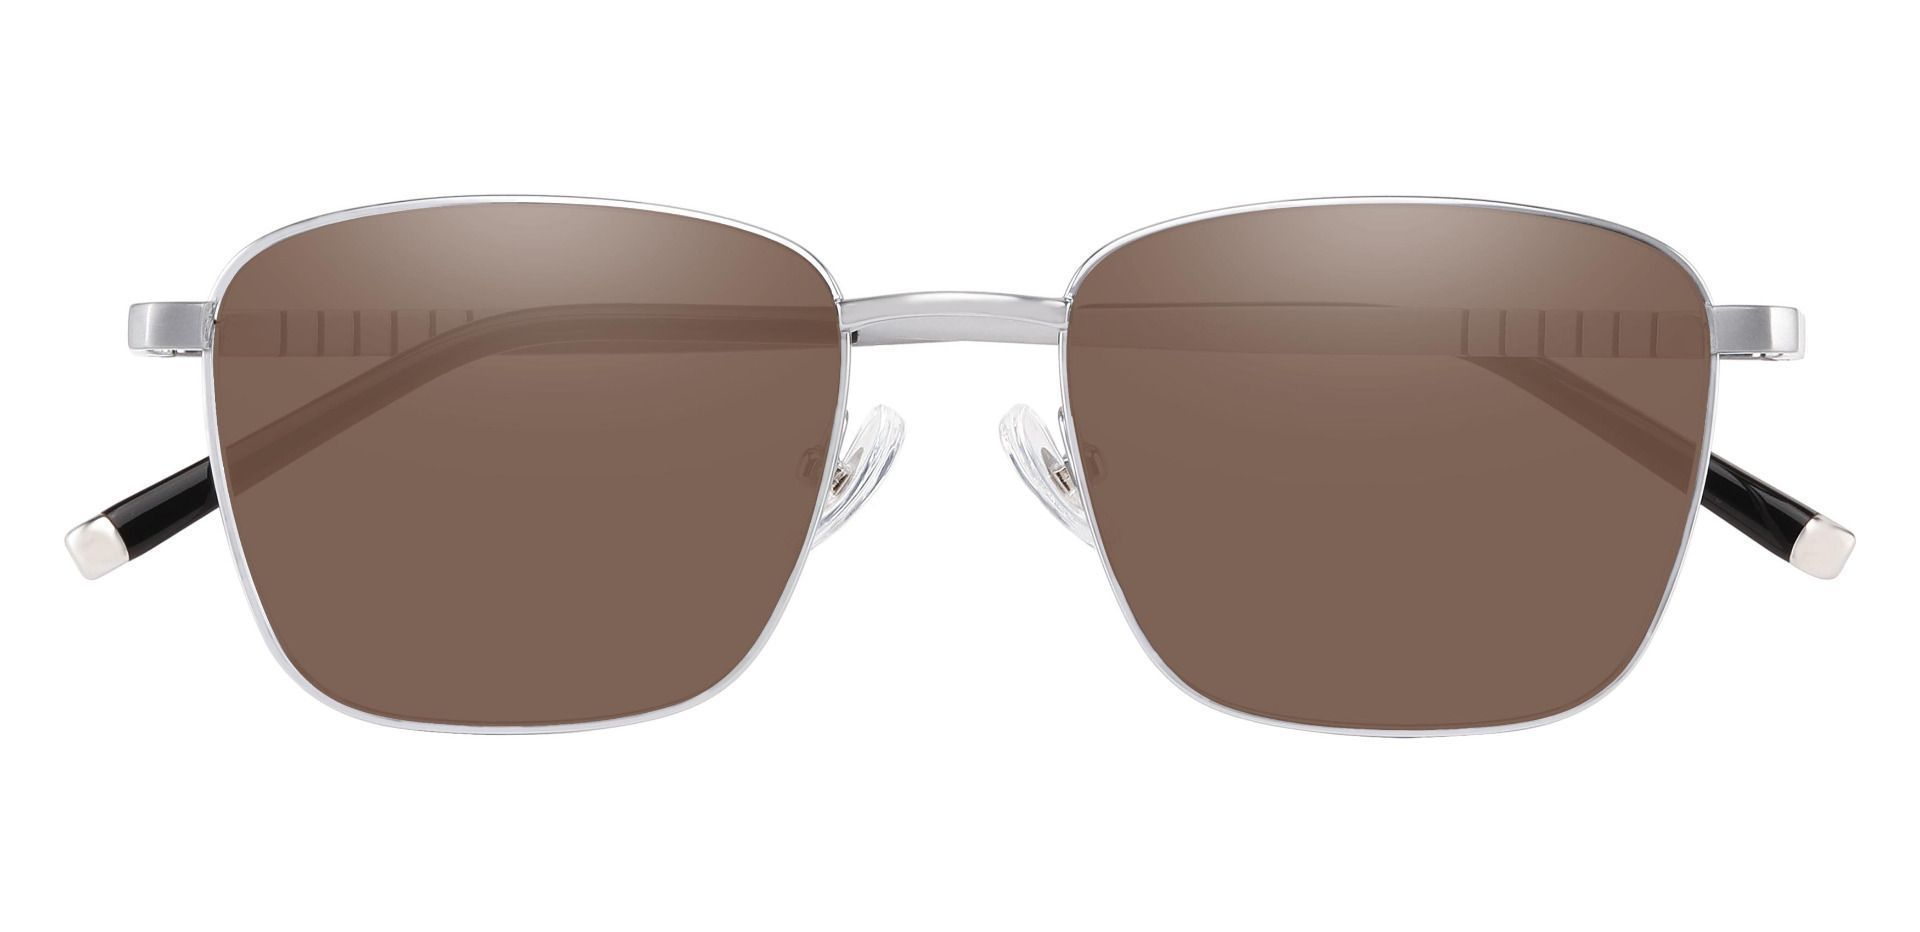 May Square Progressive Sunglasses - Silver Frame With Brown Lenses